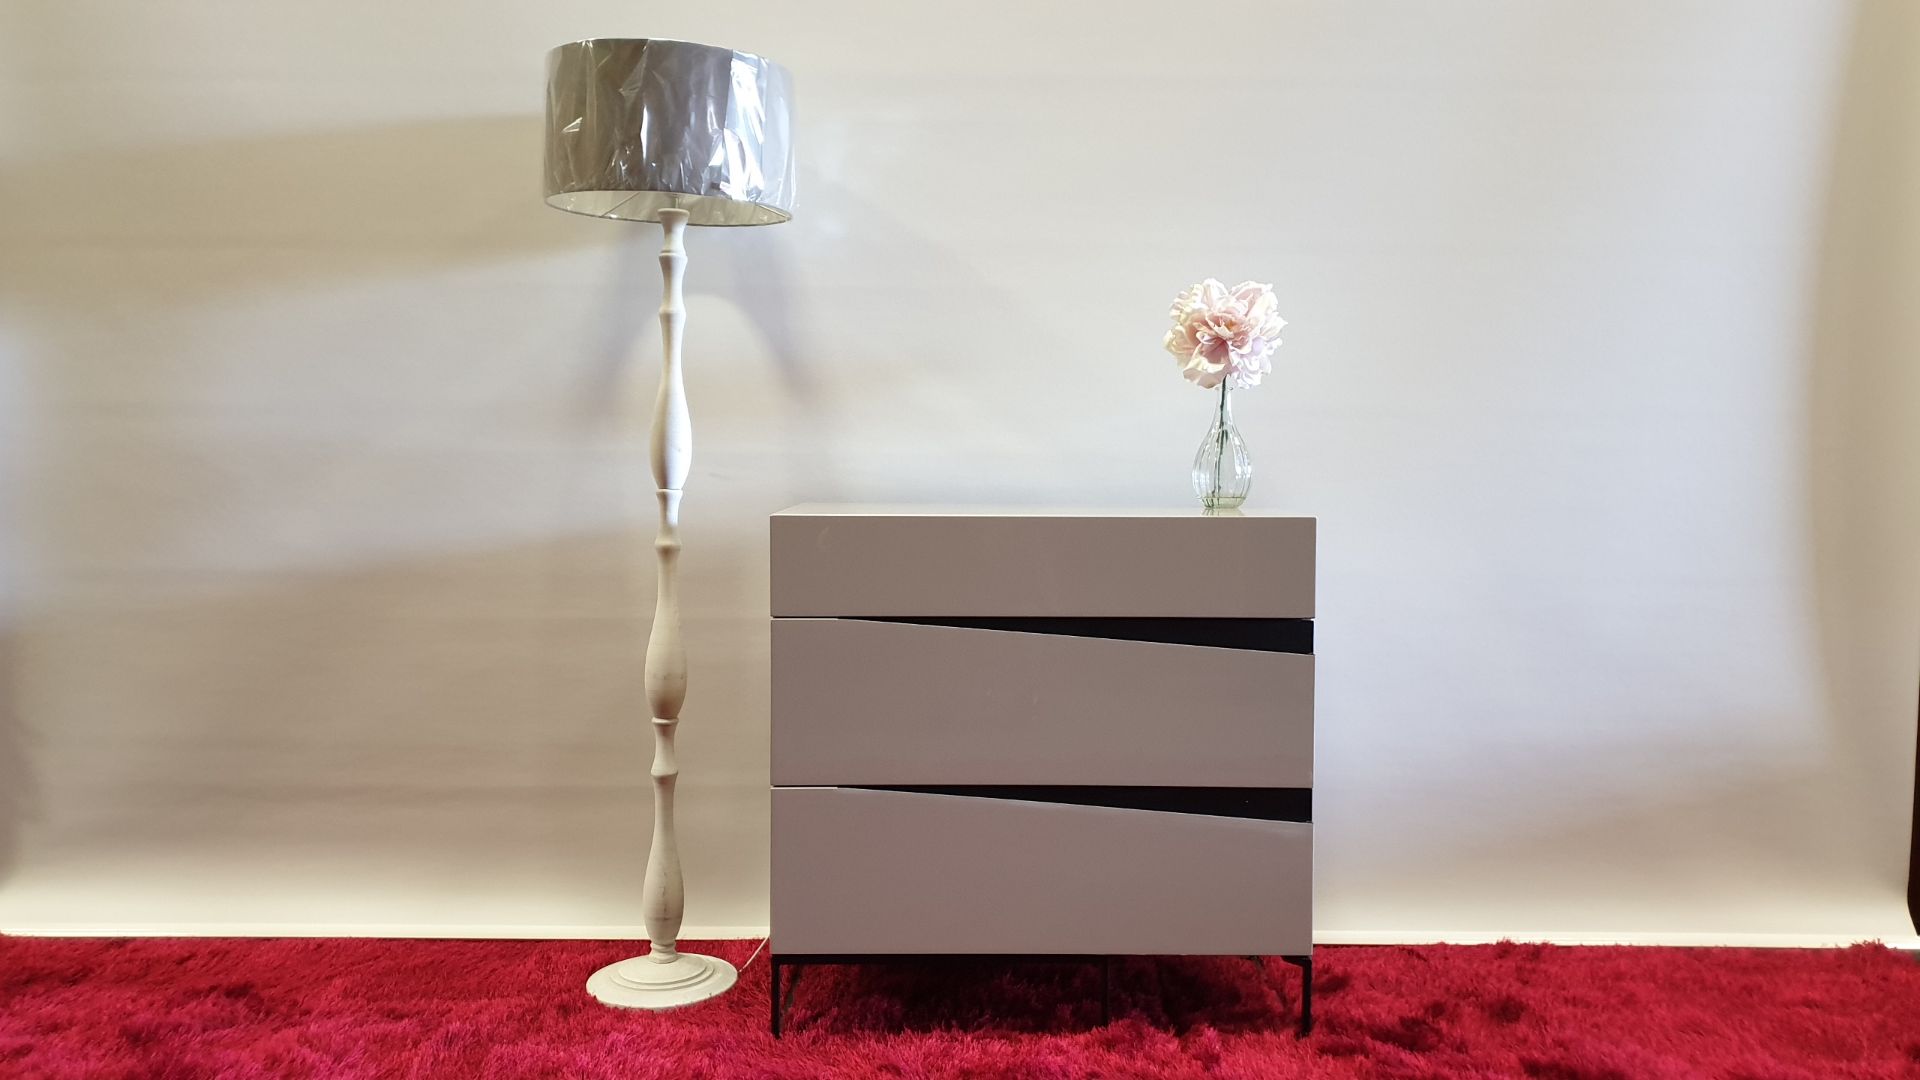 BRAND NEW 3 DRAWER HIGH GLOSS AVORIO MDF SOFT CLOSE CHEST OF DRAWERS 800 X 411 X 803MM RRP £329